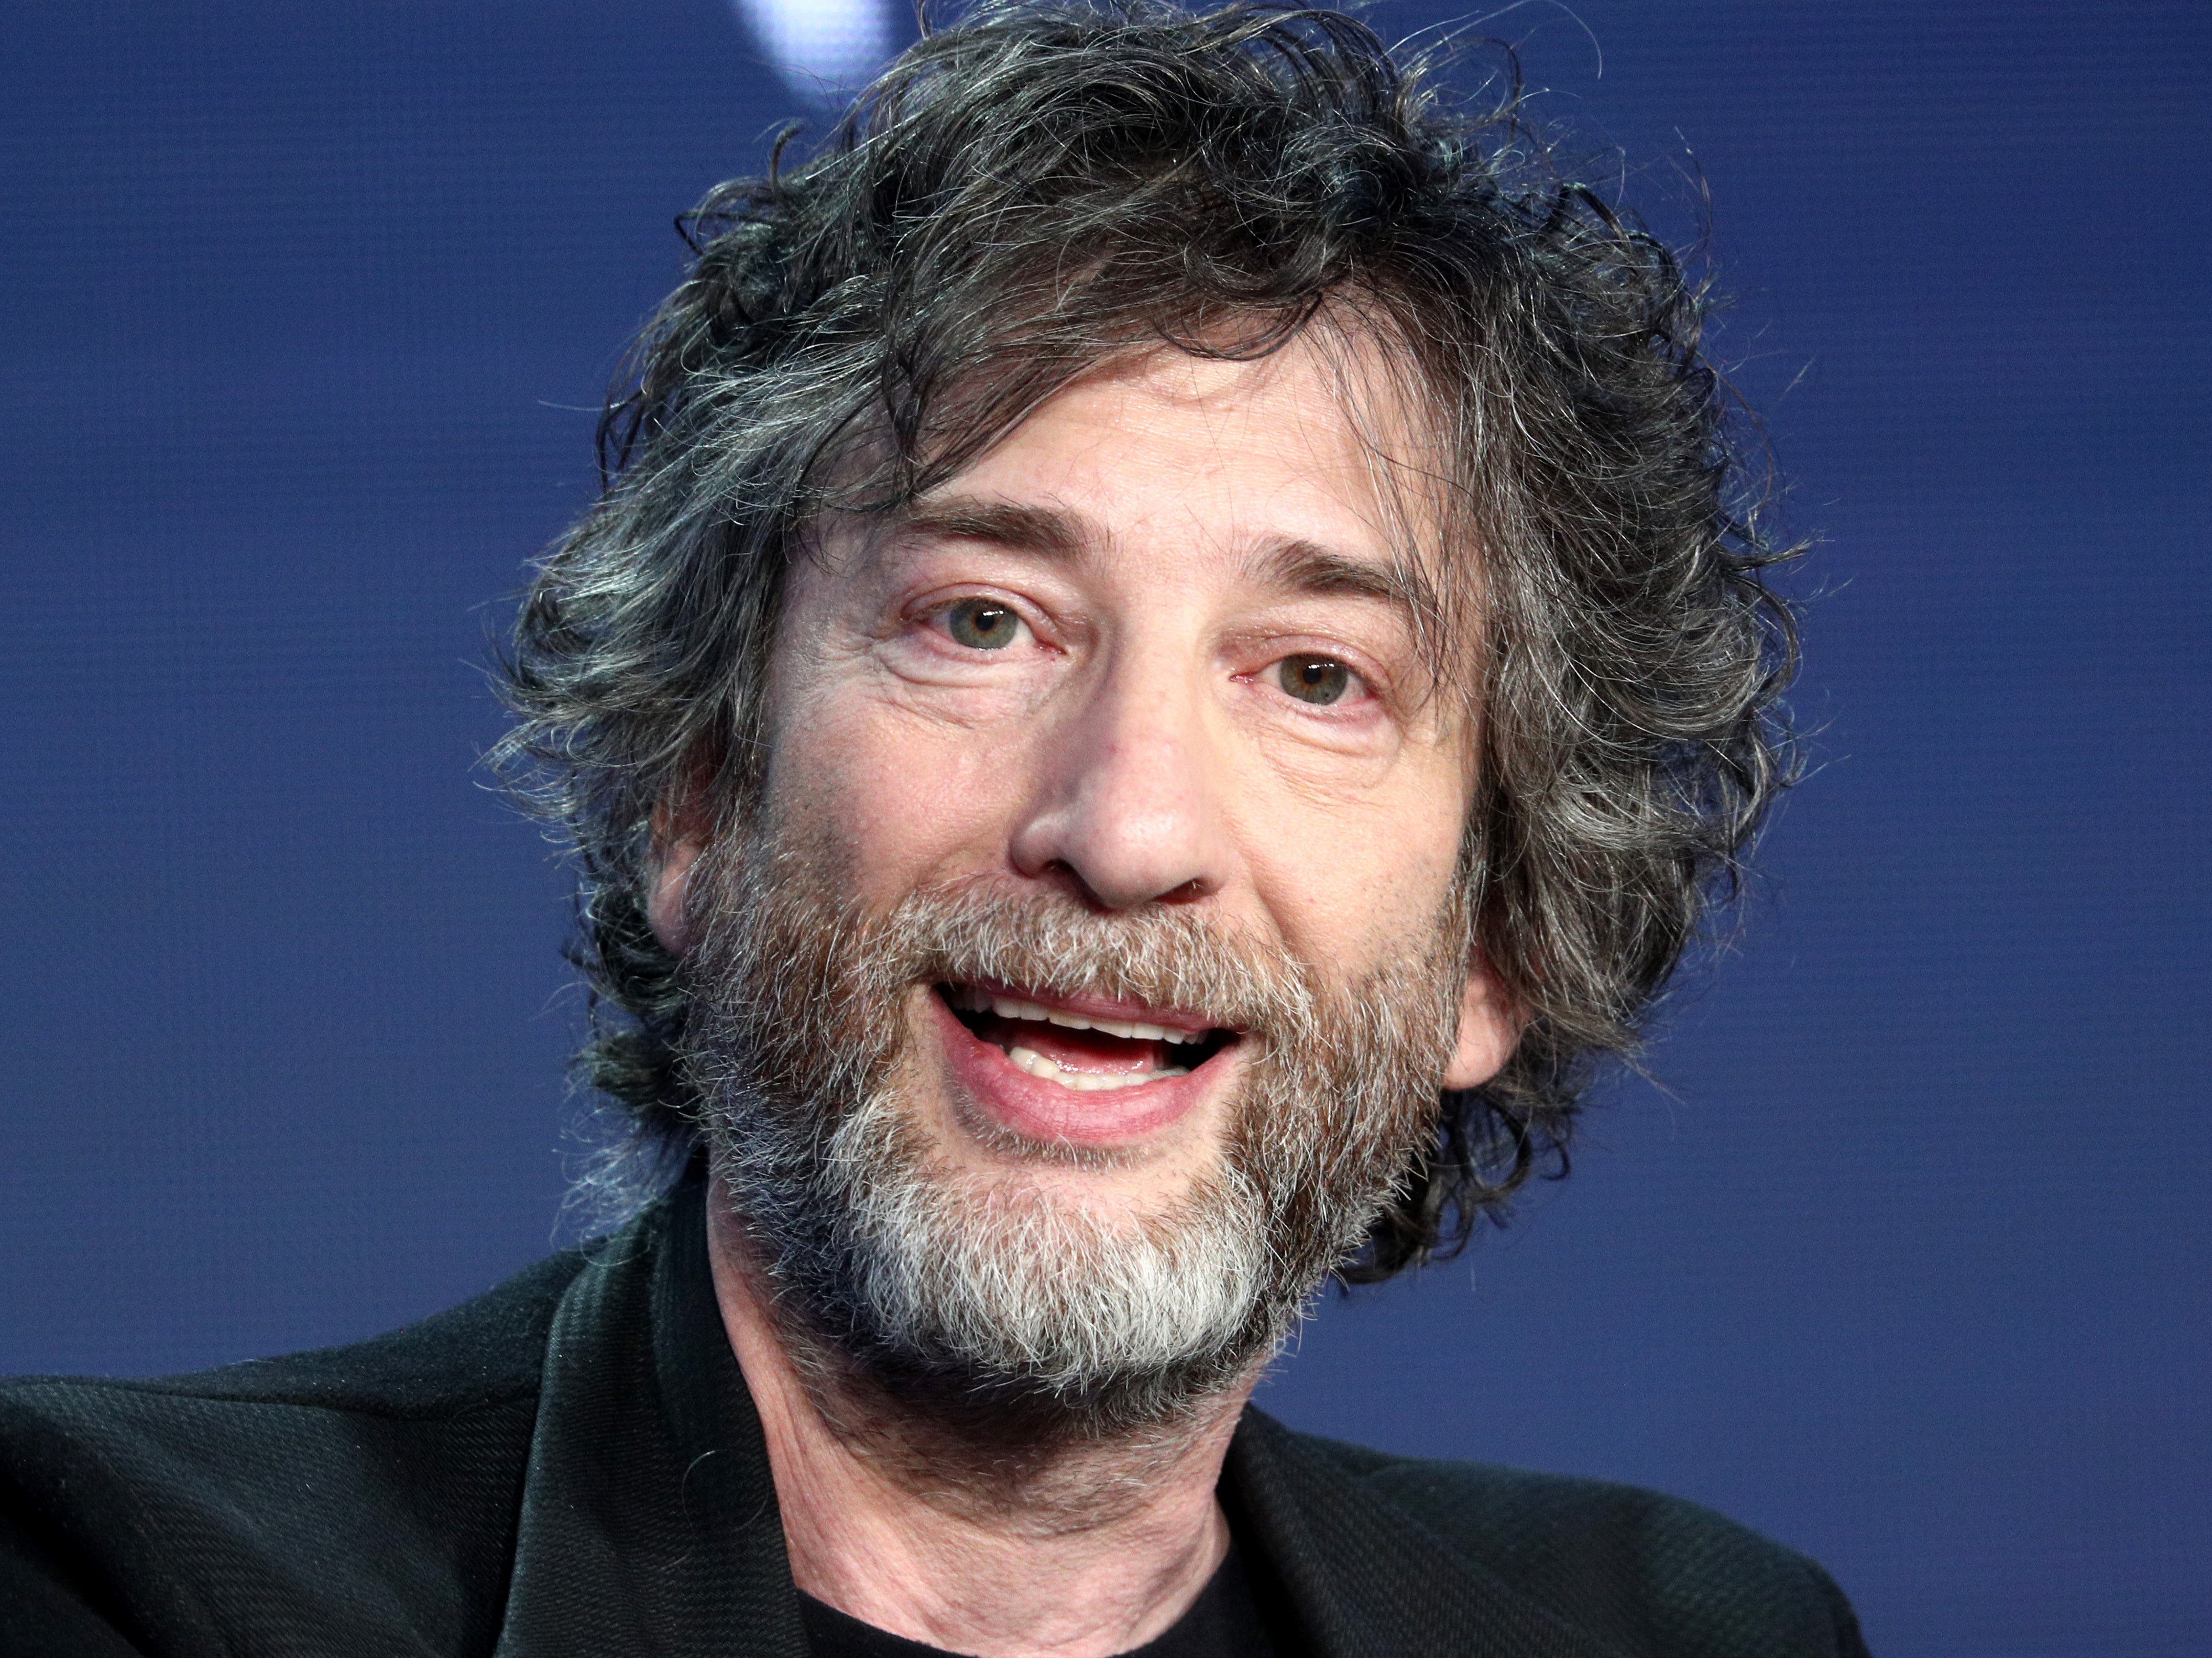 Neil Gaiman has opened up about disappointing his most dedicated readers